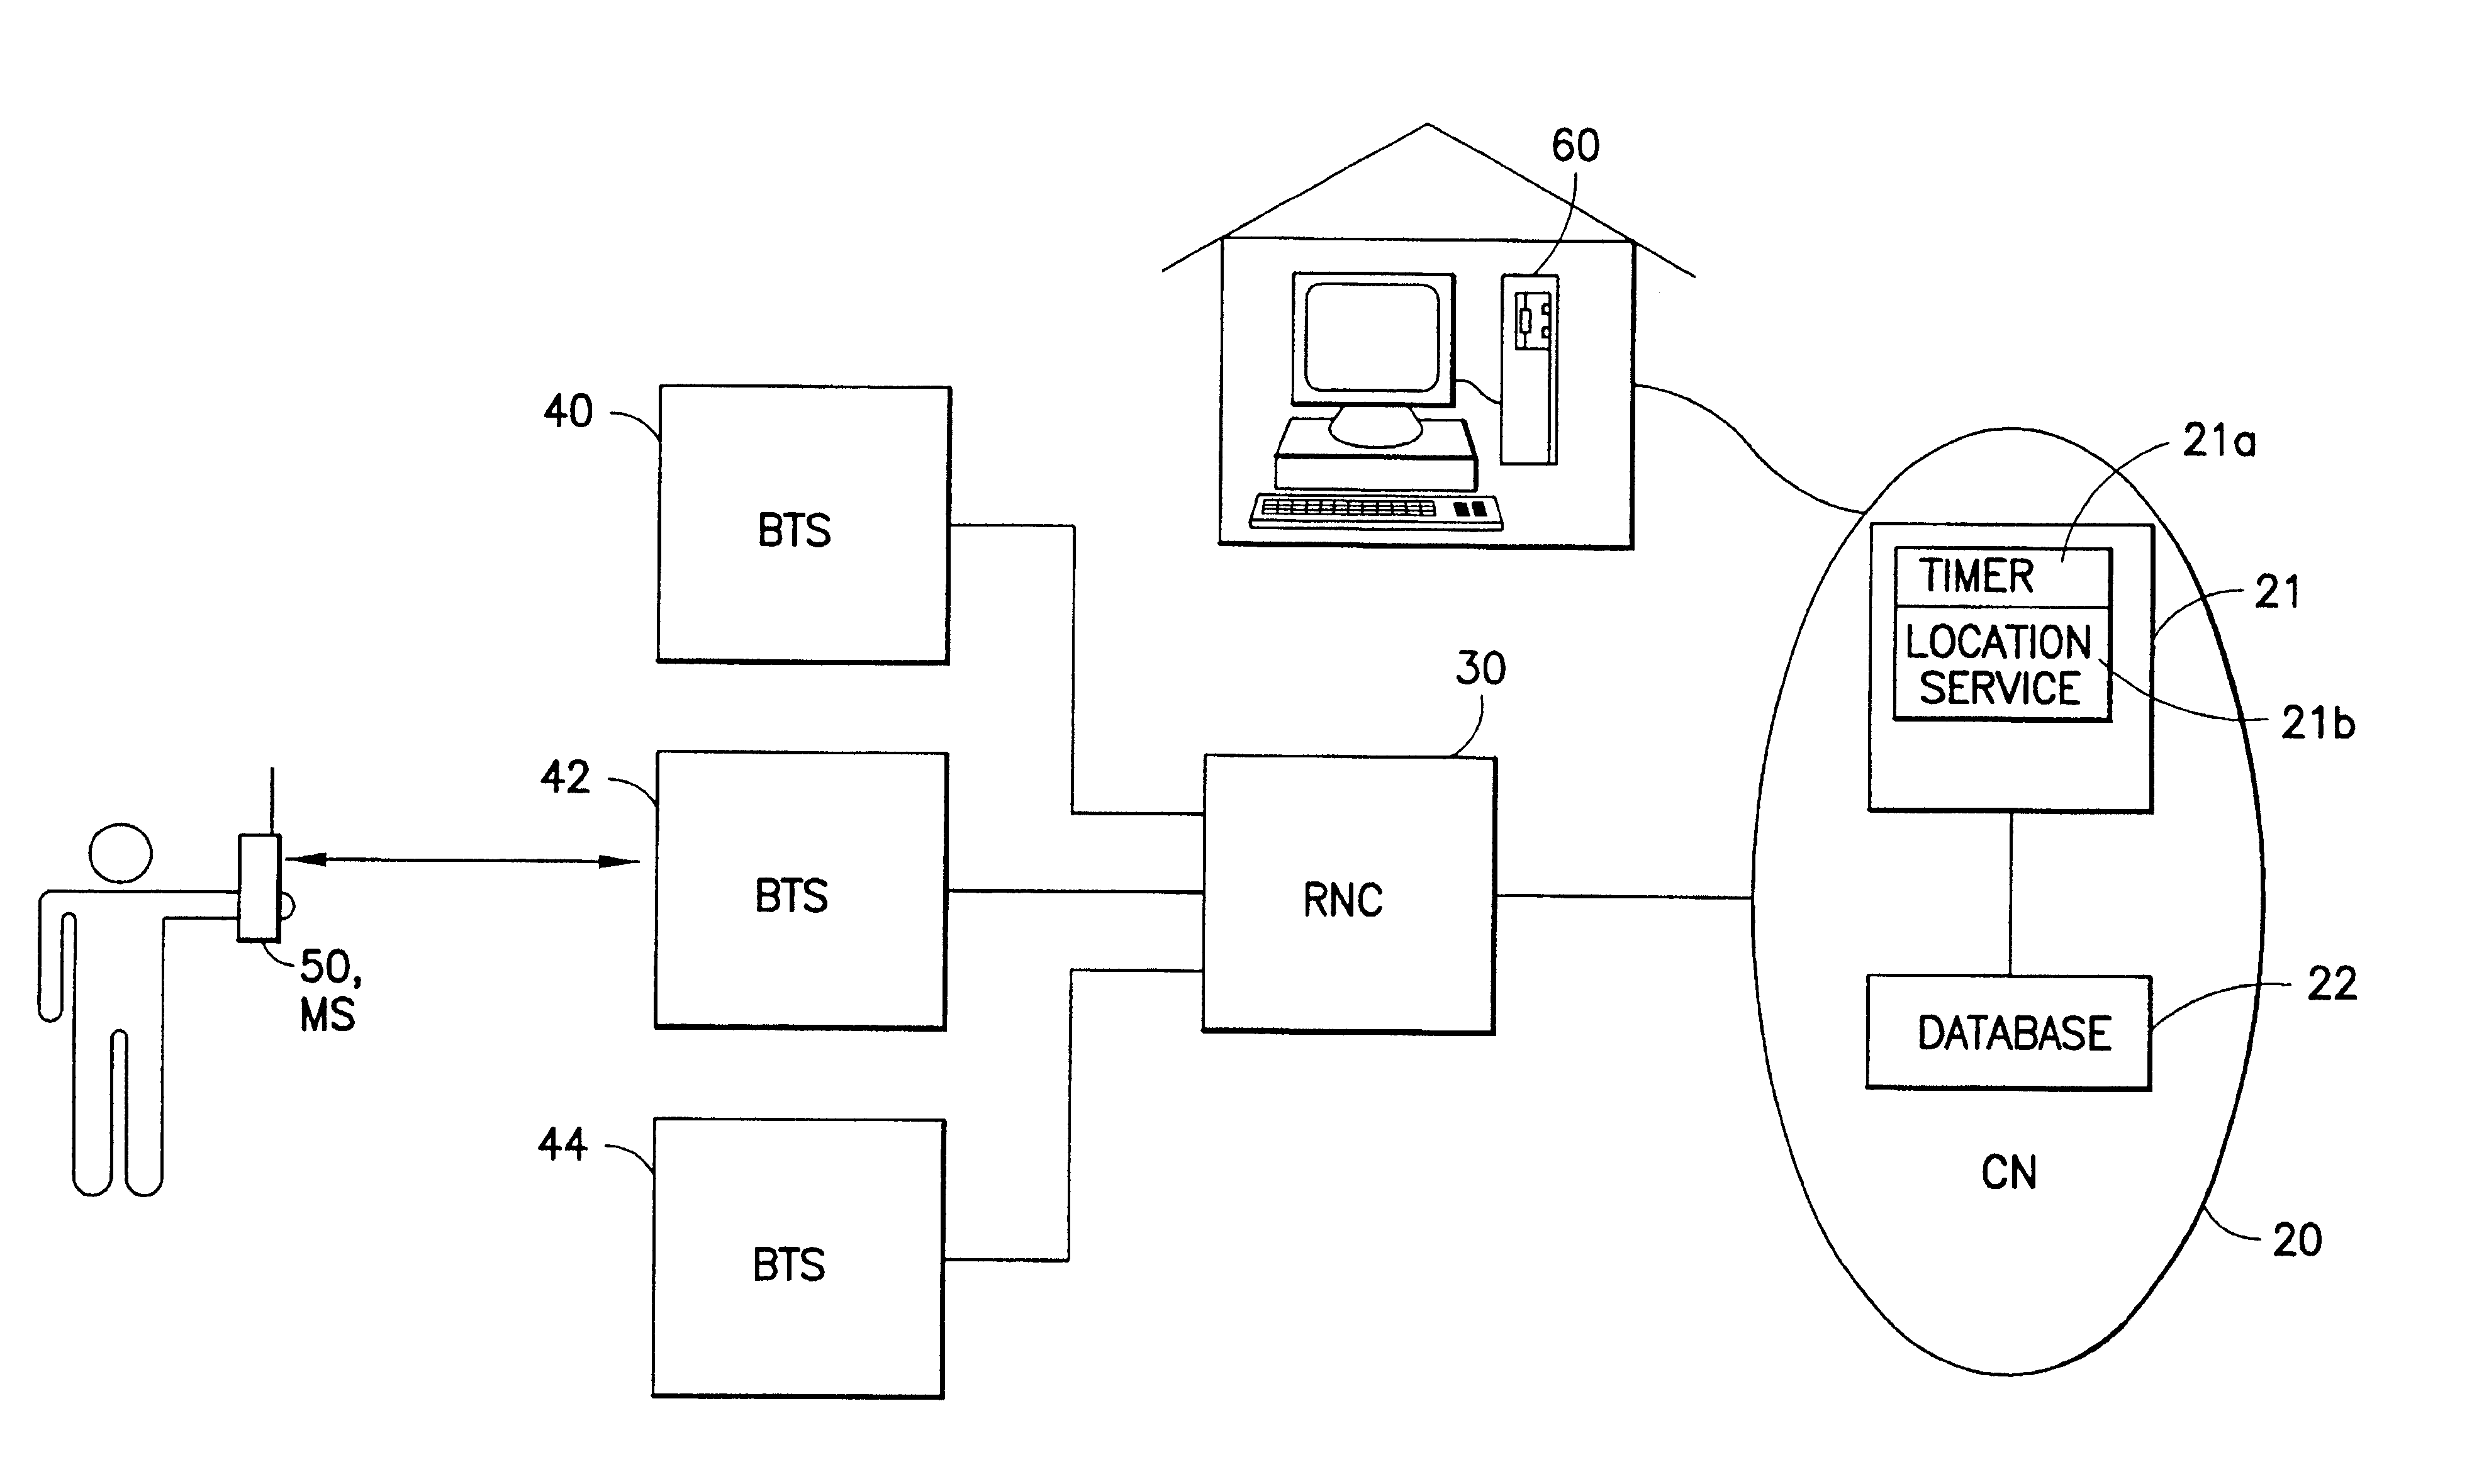 Apparatus and method for measuring and recording movement of a mobile station using a mobile network